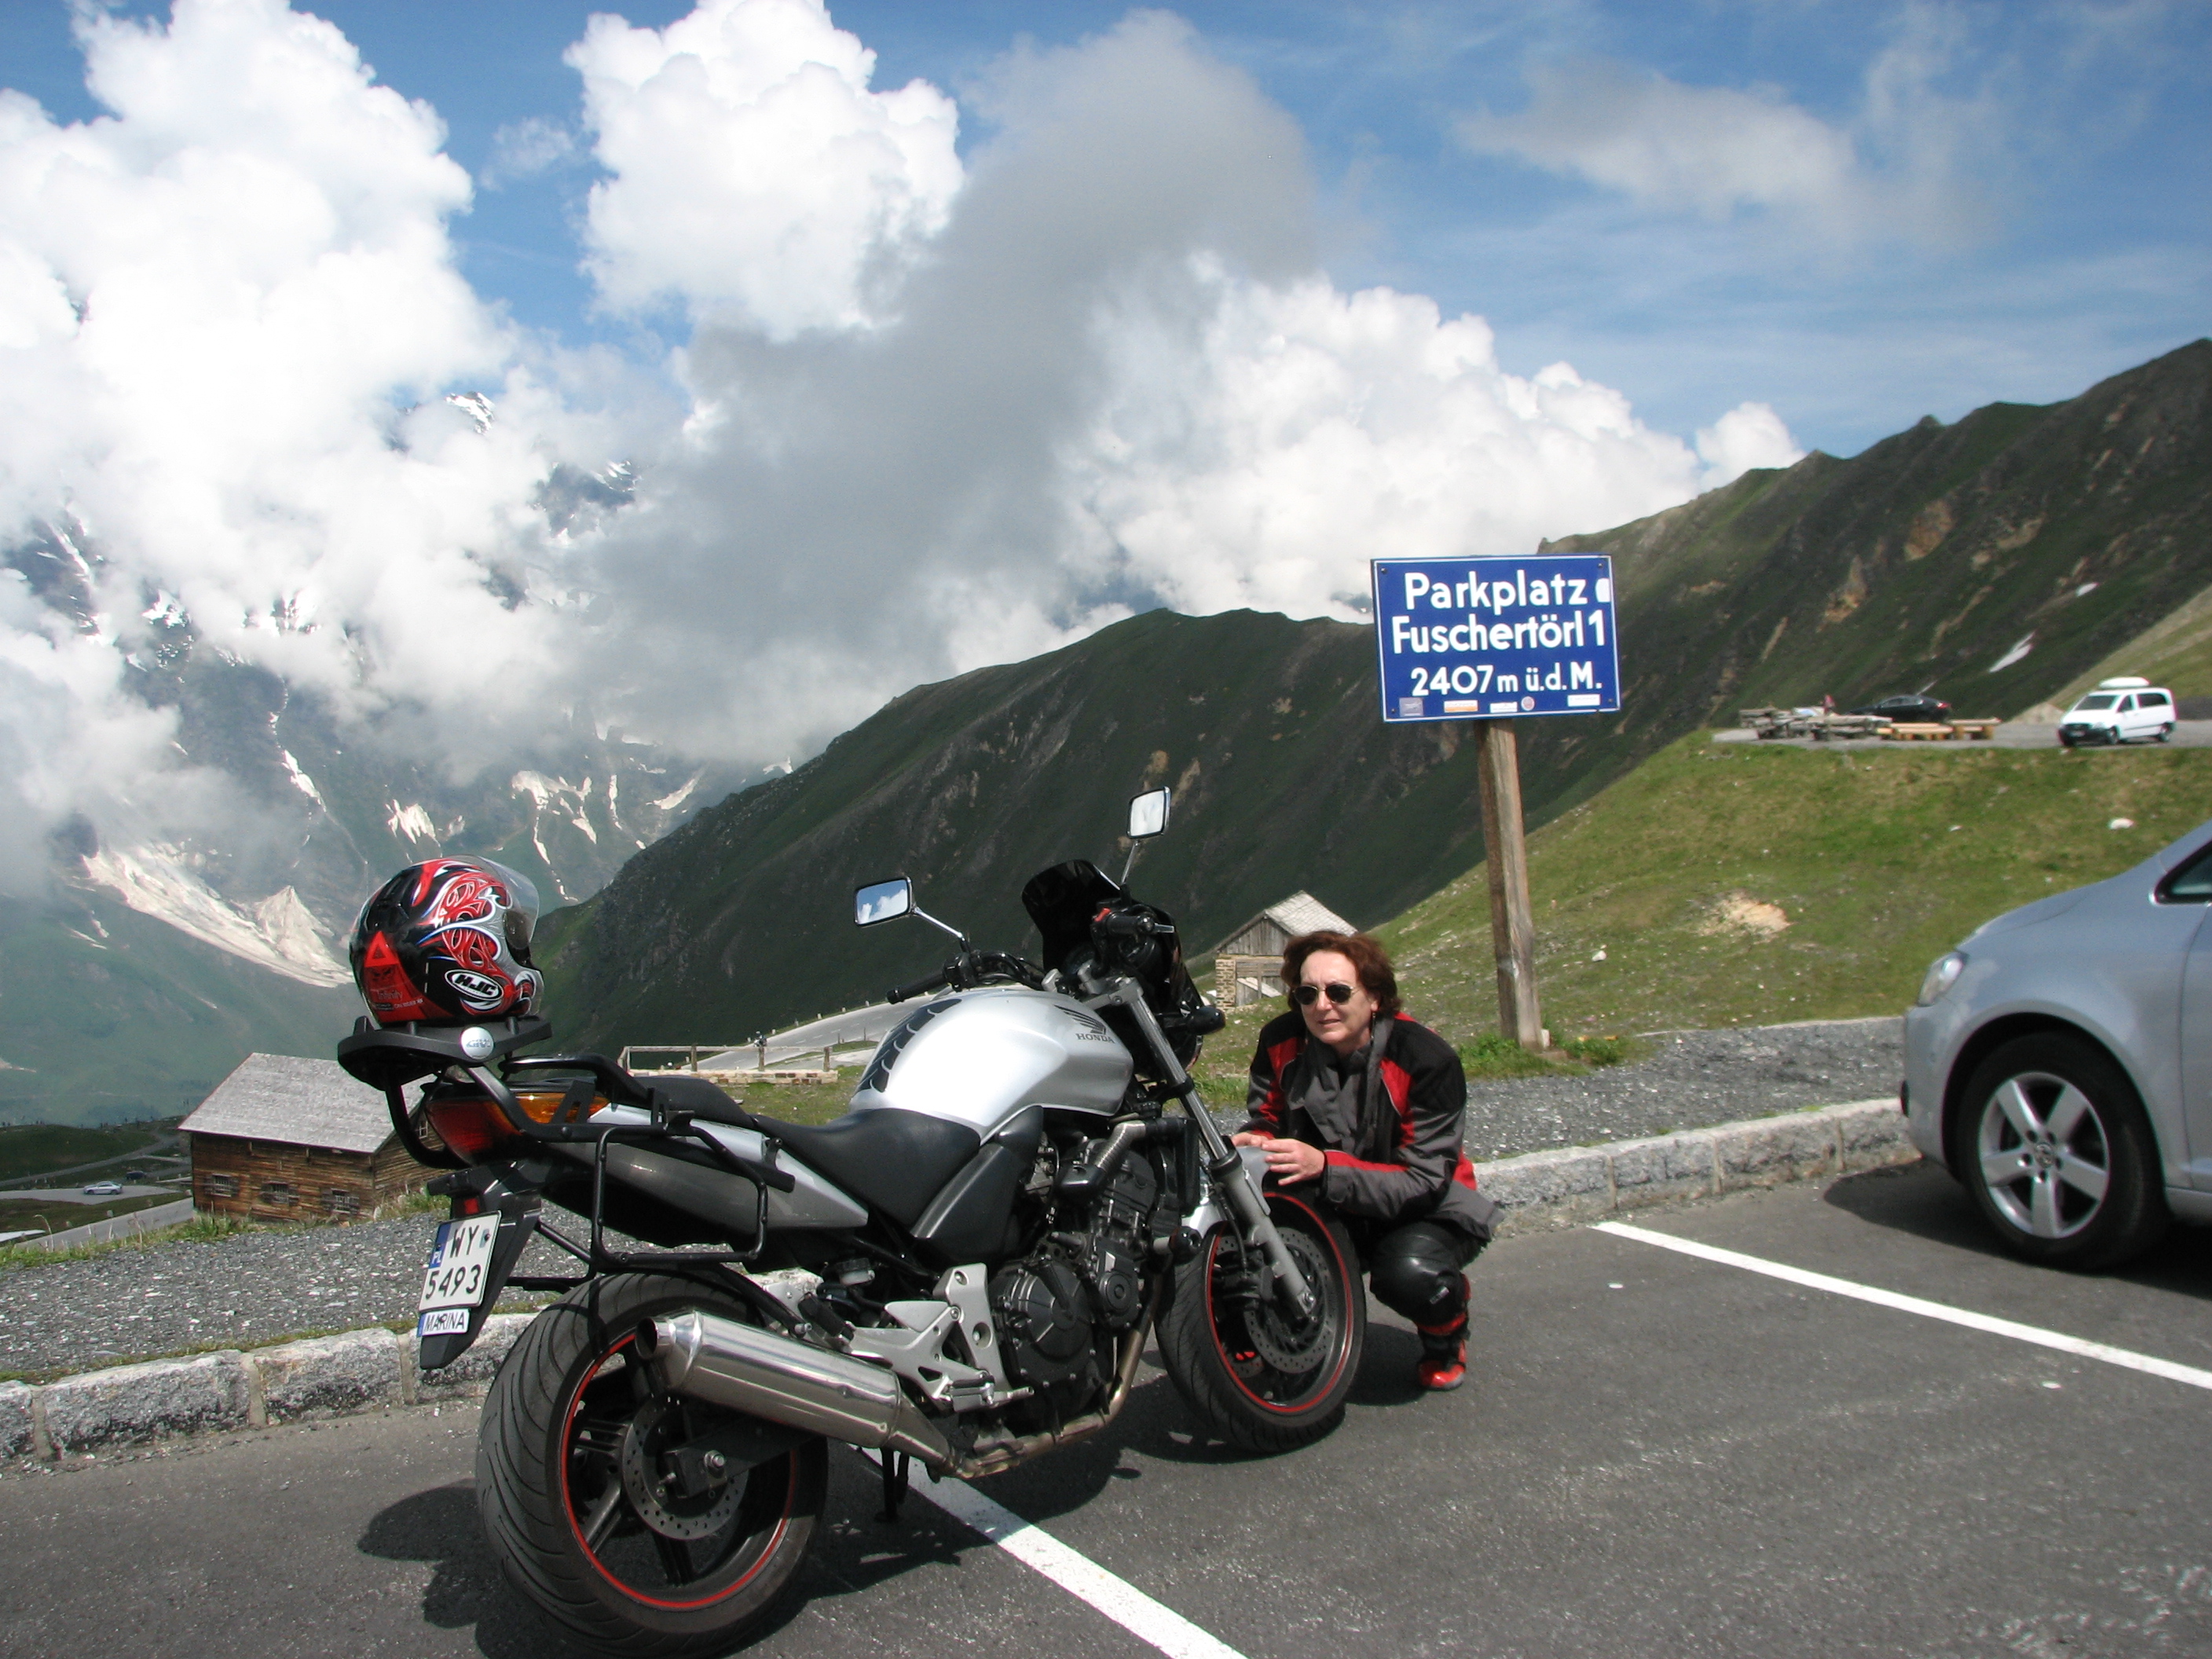 Women Who Ride: Marina riding in the Alps